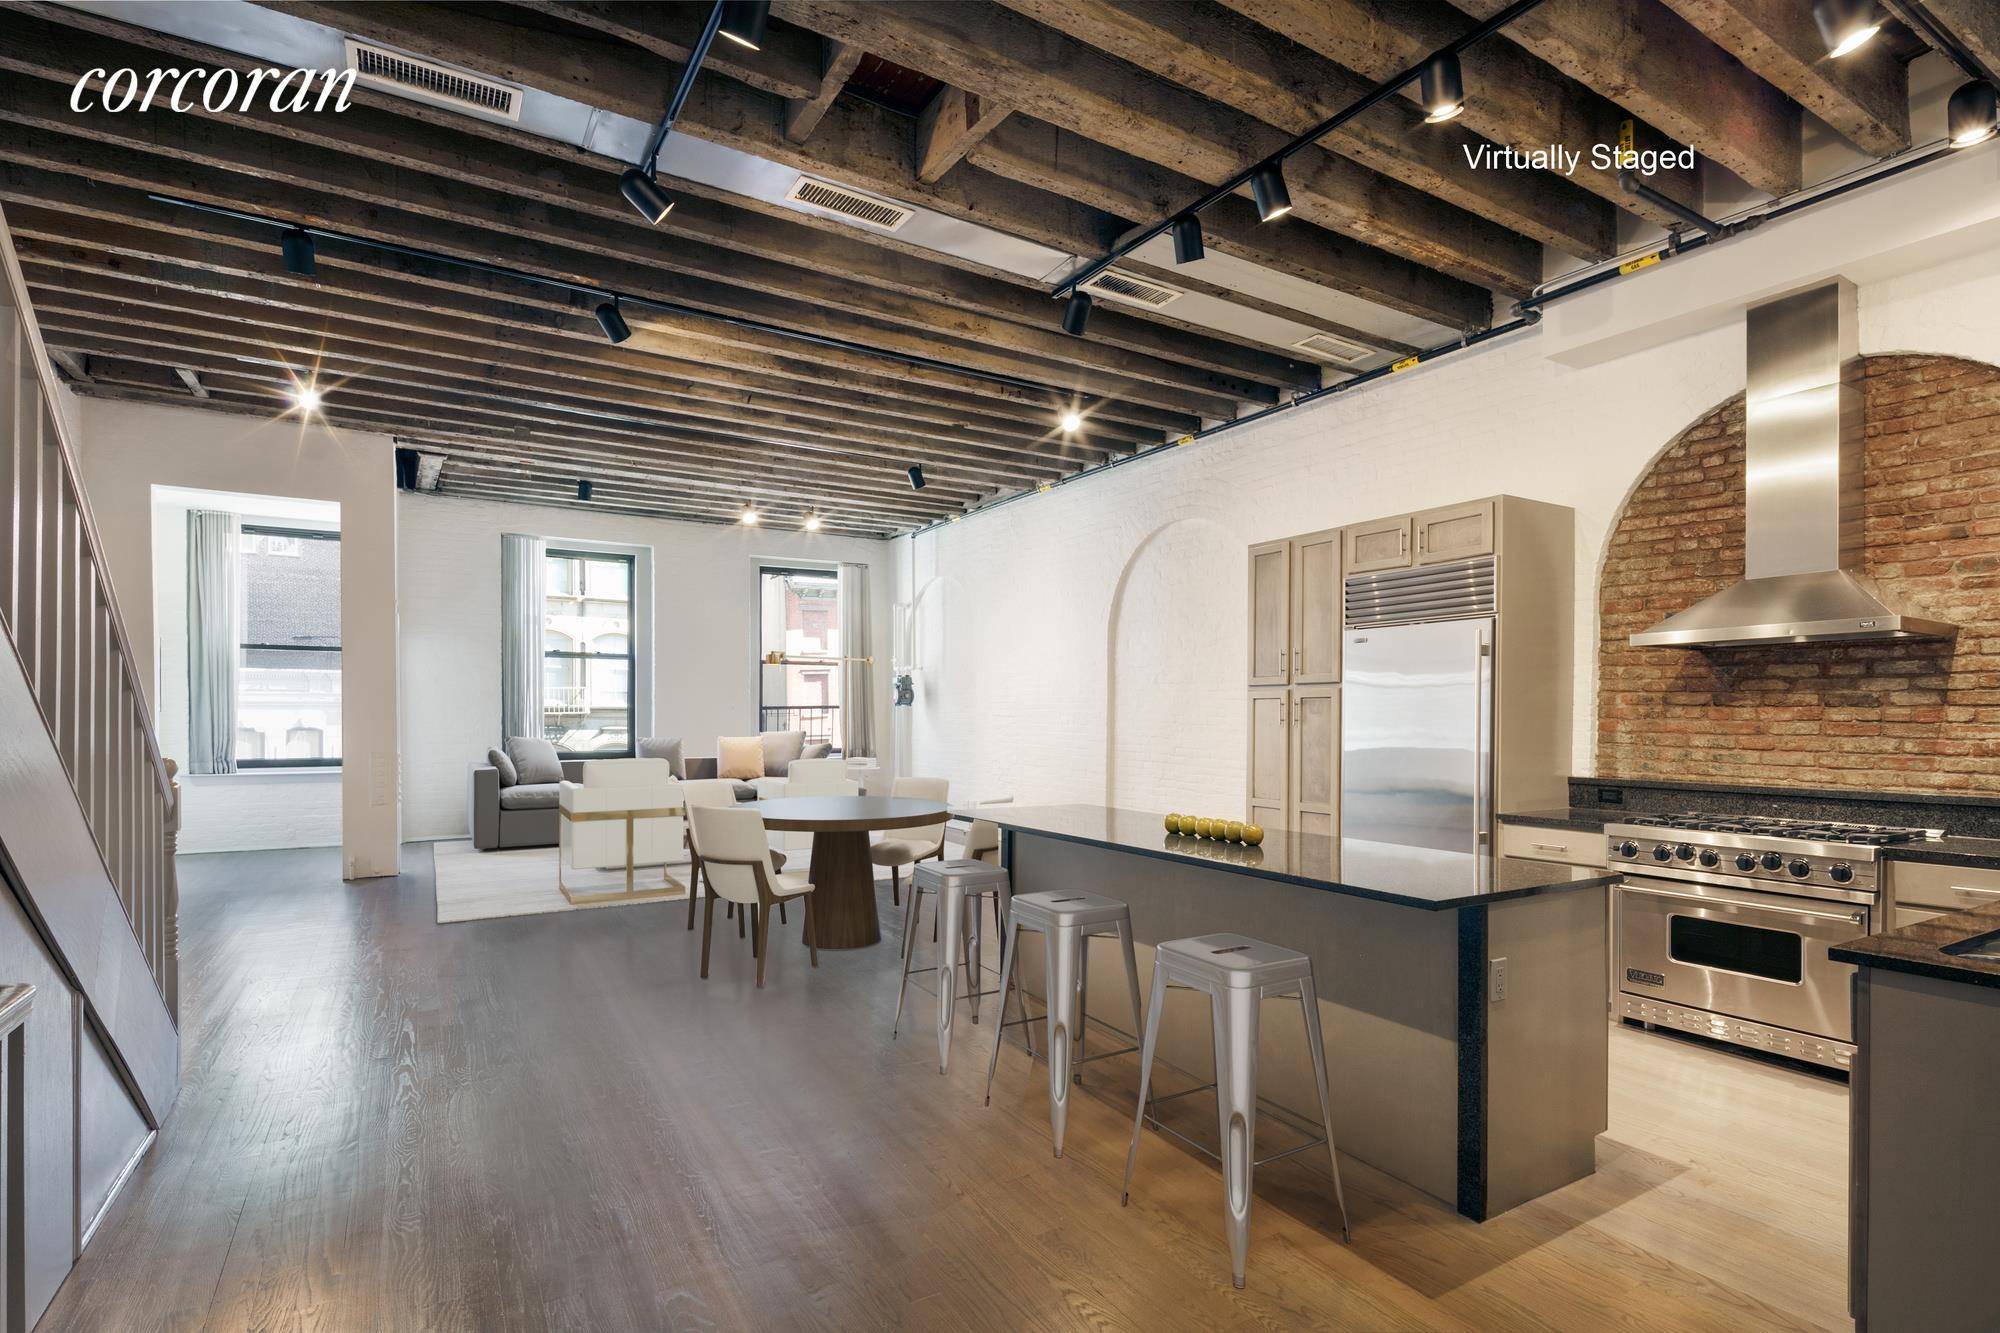 The sights and sounds of Tribeca unfold at your feet in this beautifully renovated, ultra private duplex loft home topped by a 400 square foot private roof deck.